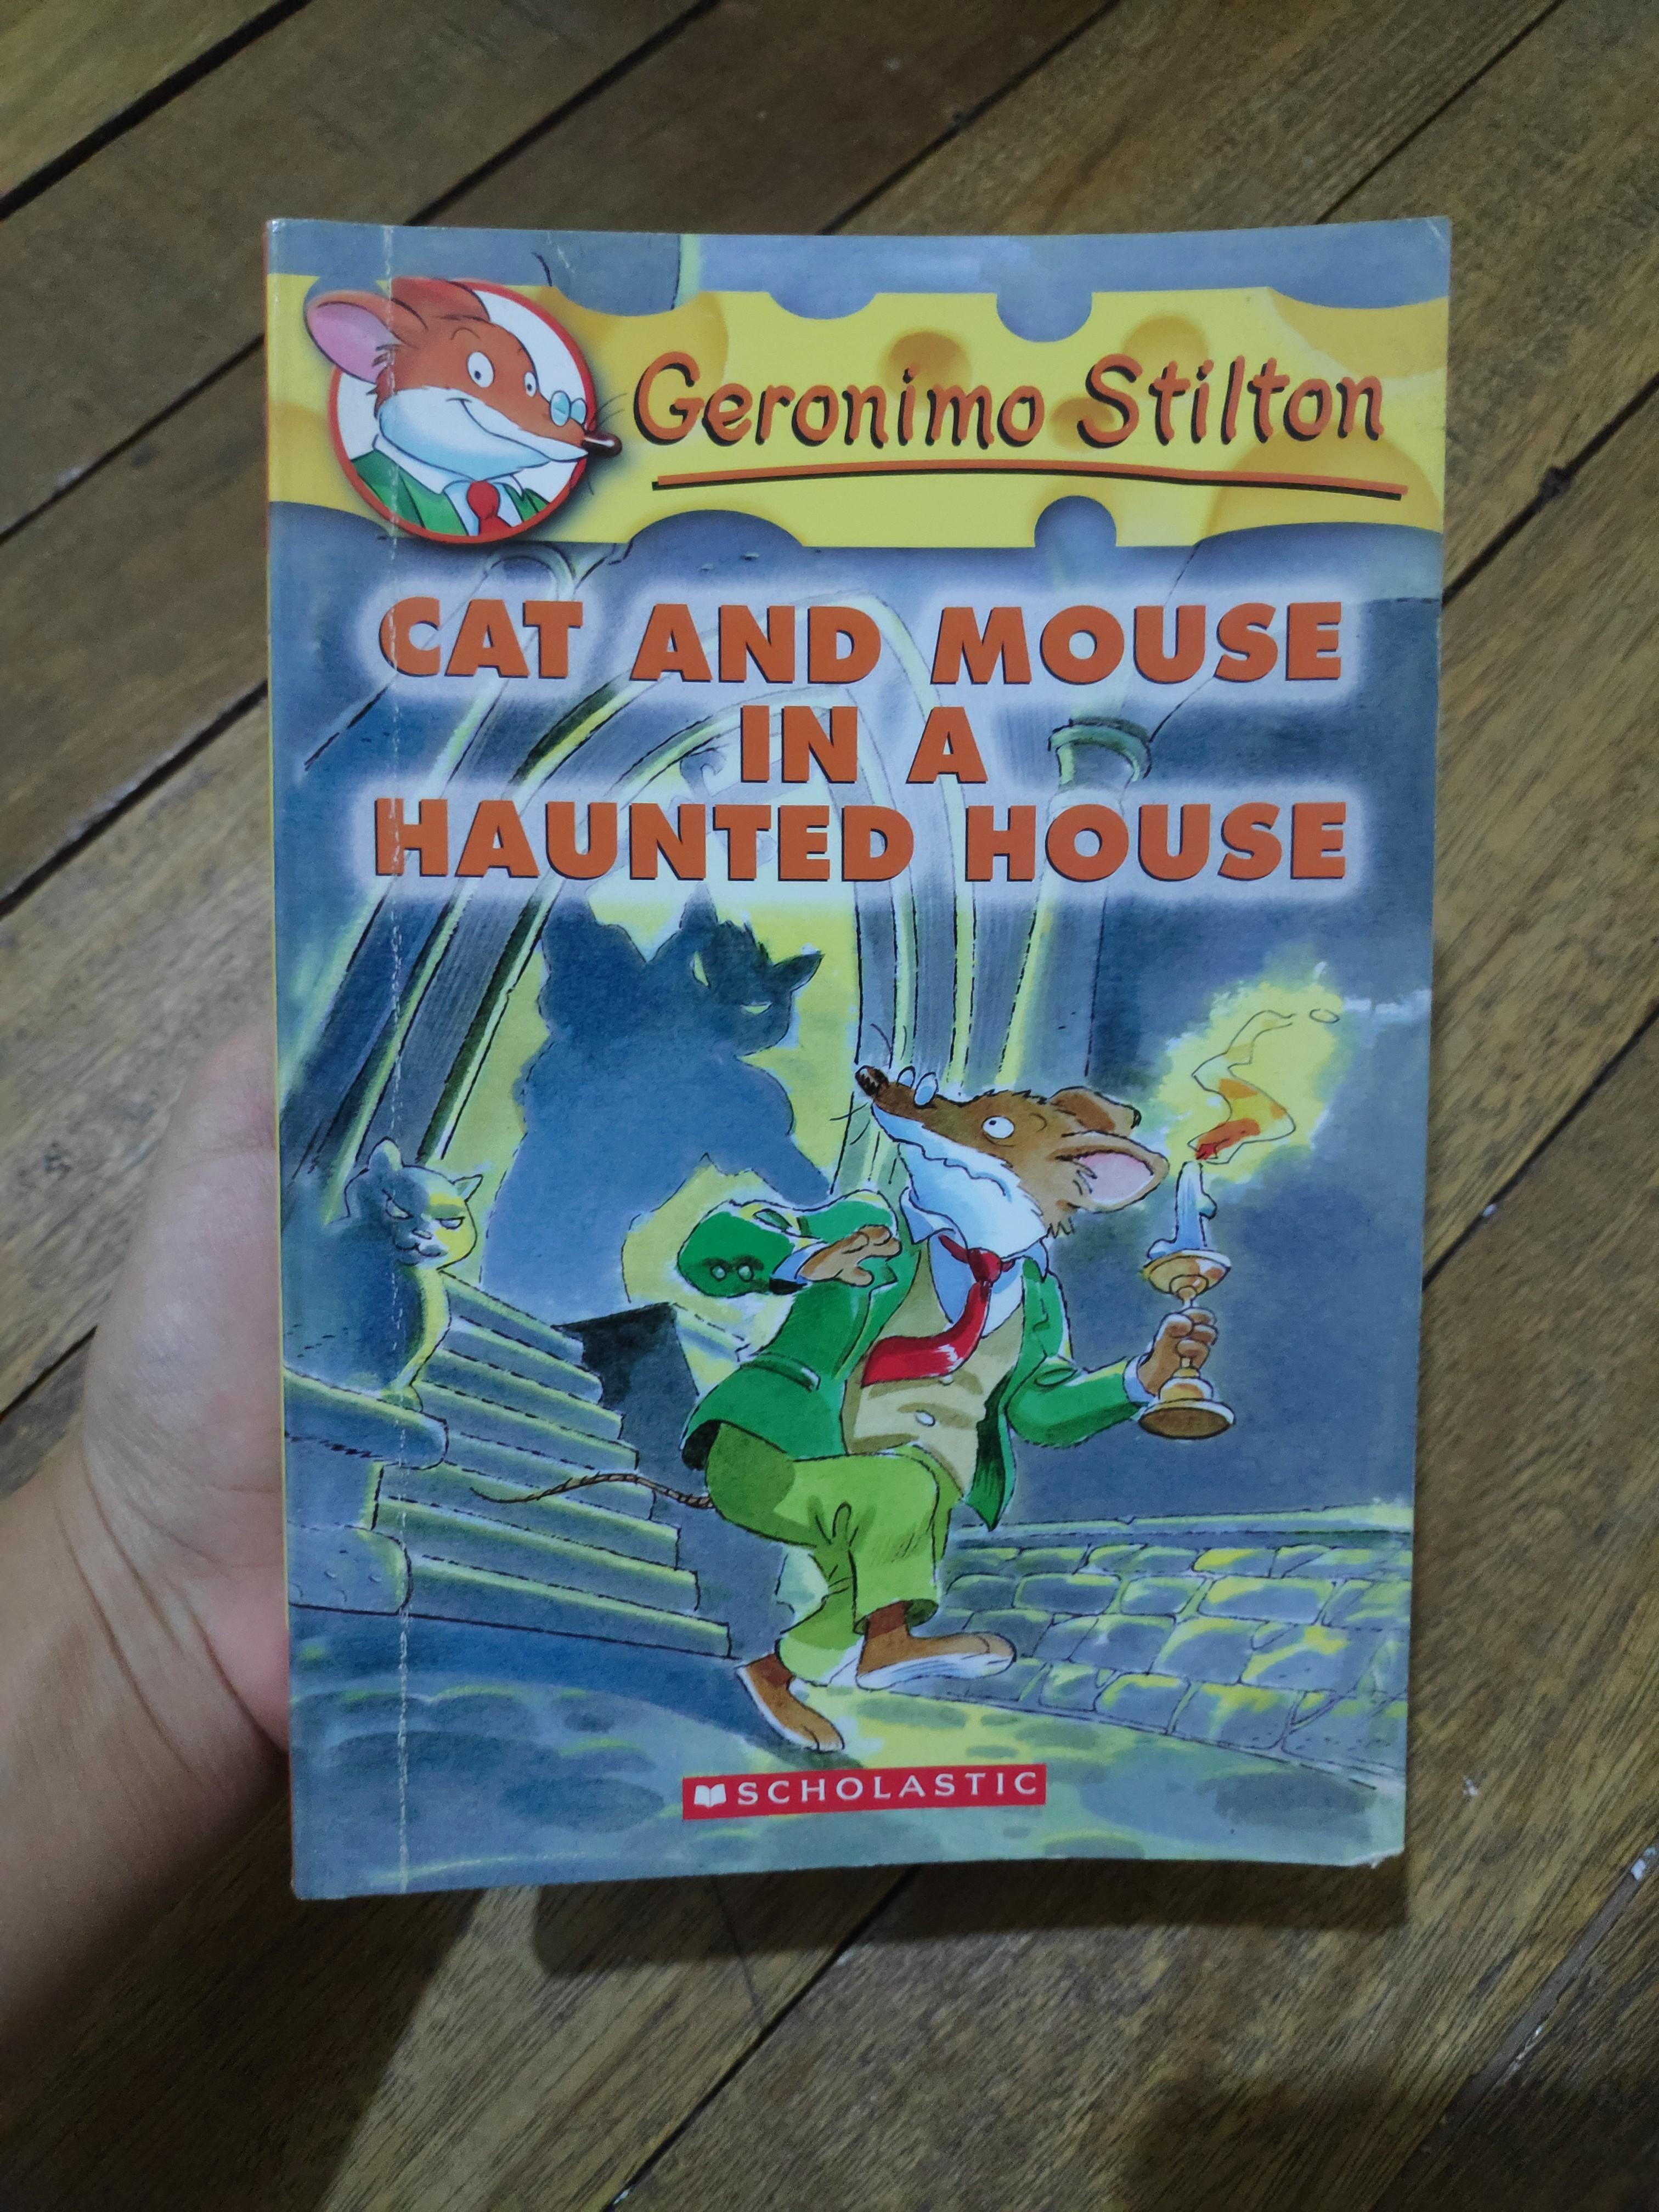 Geronimo Stilton 3 Cat And Mouse In A Haunted House Scholastic Hobbies Toys Books Magazines Children S Books On Carousell